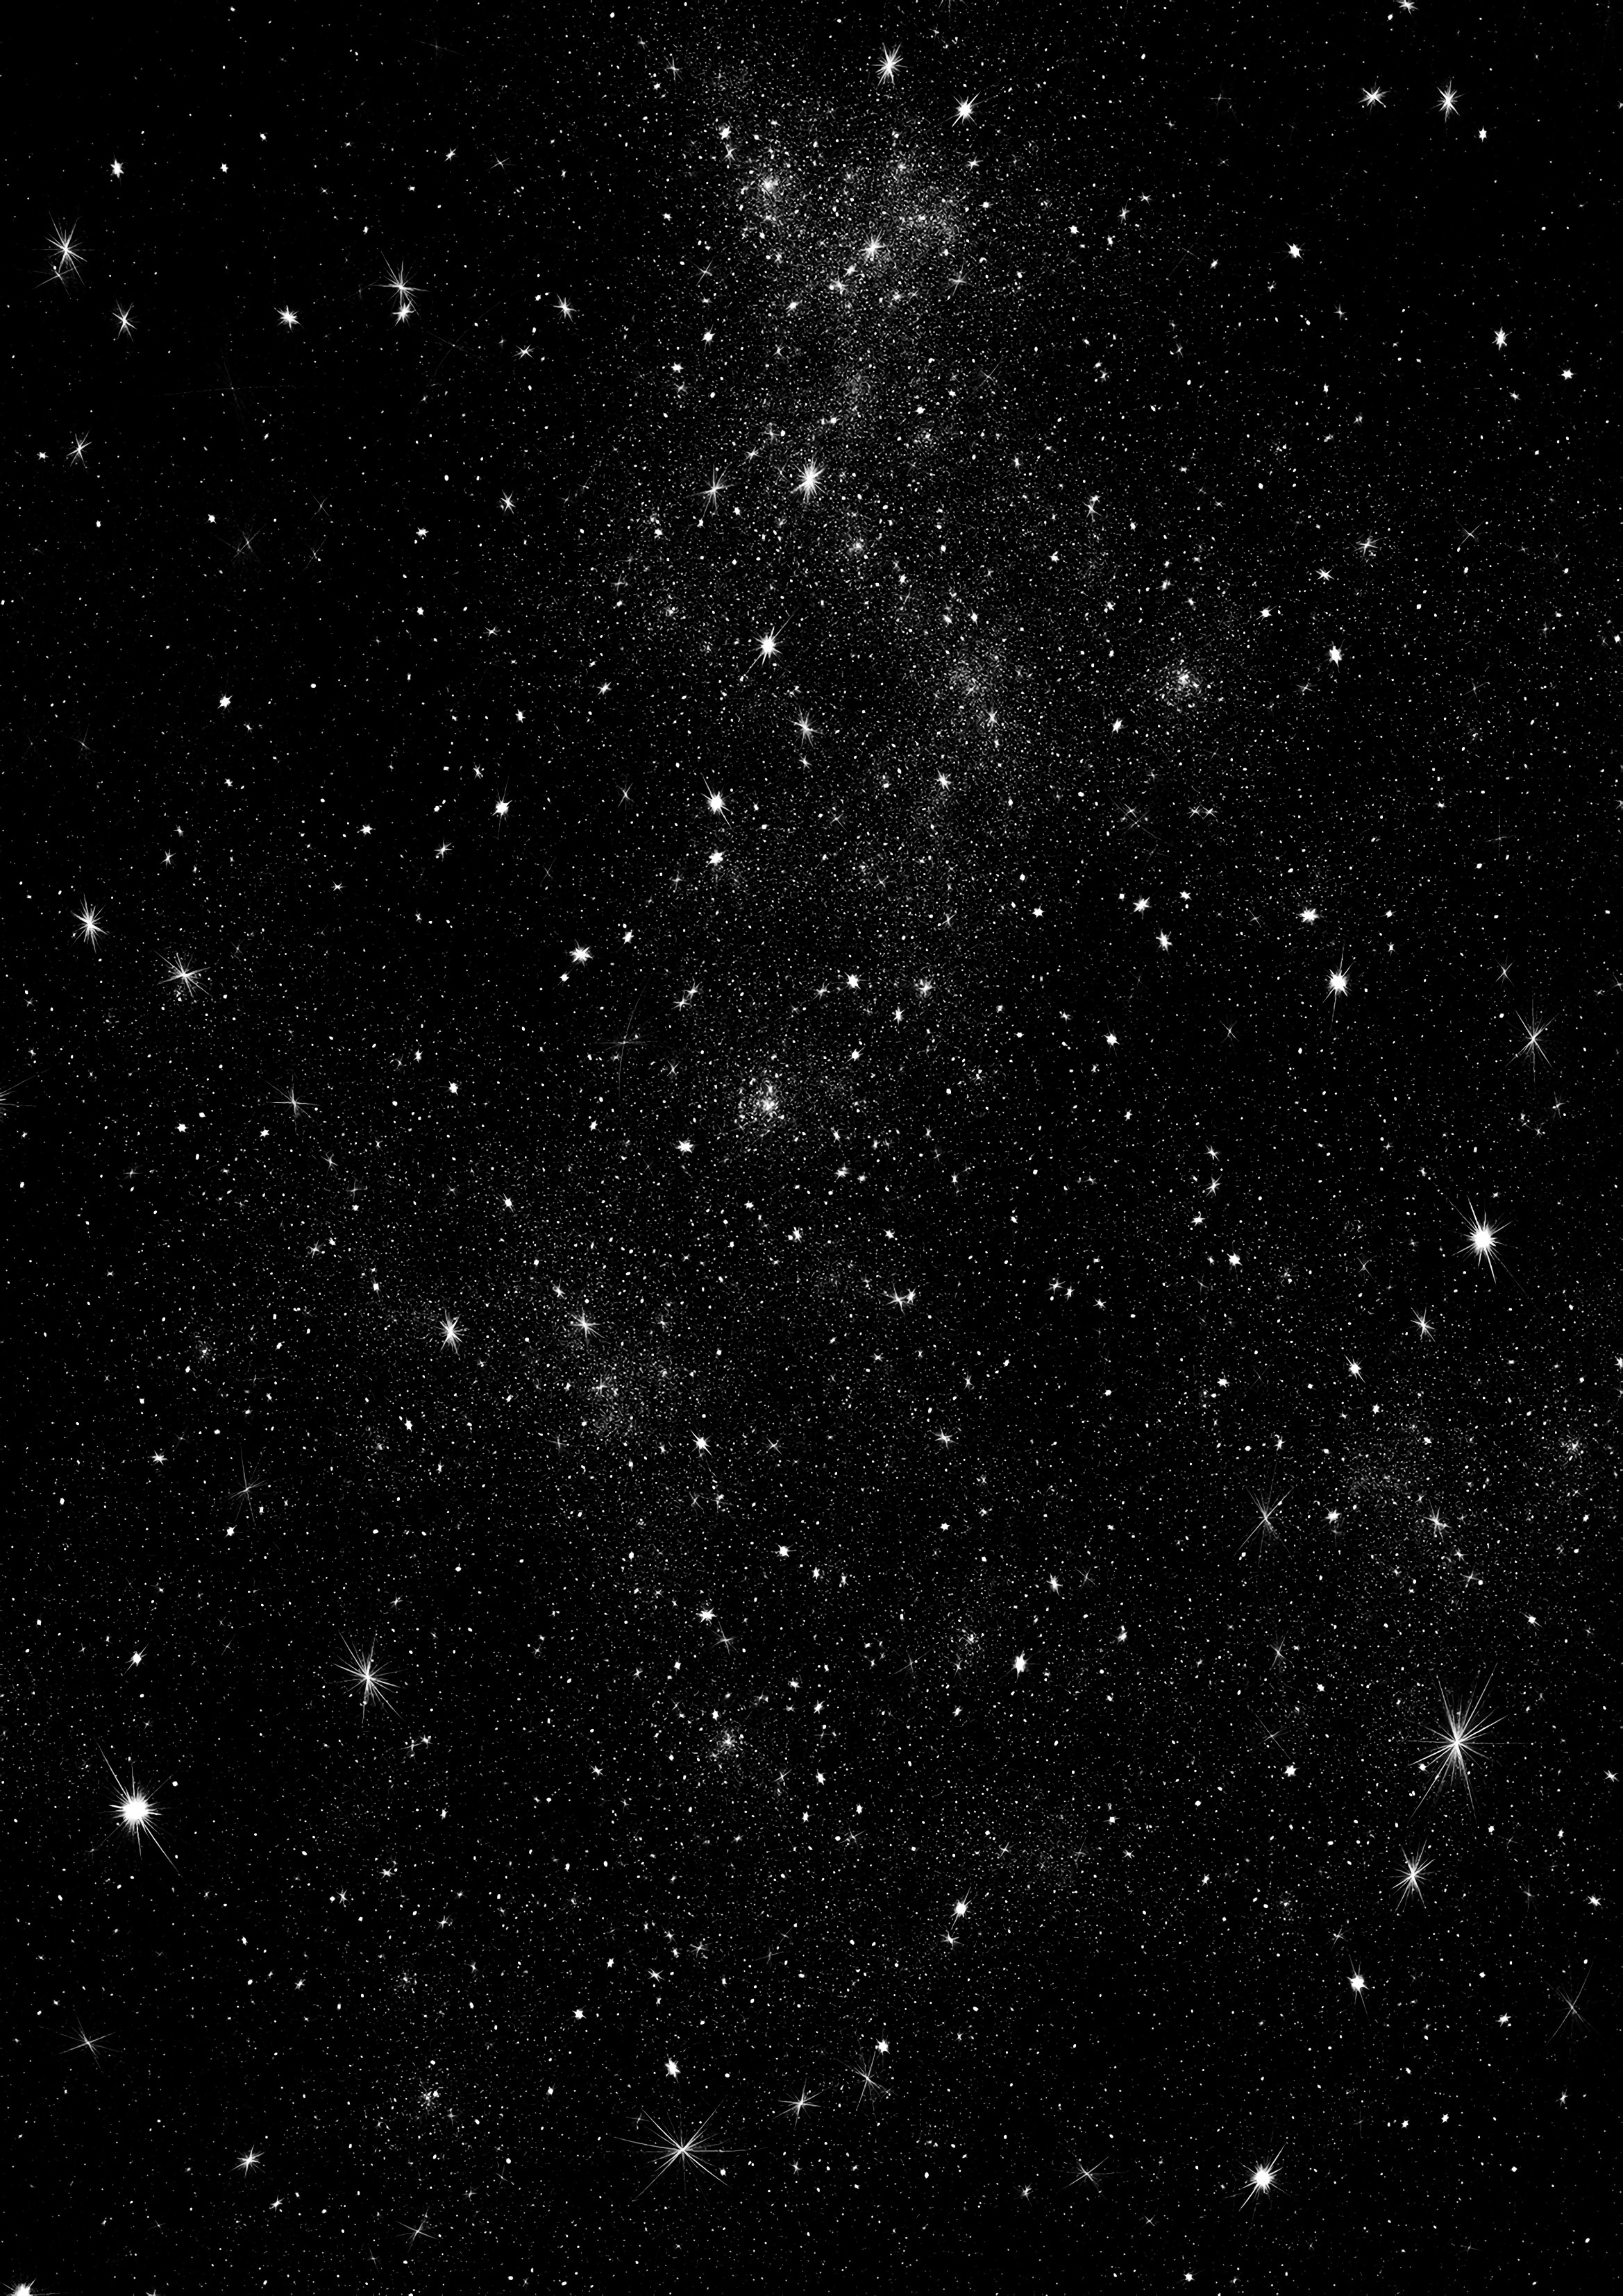 Wallpaper Black and White Stars in The Sky, Background - Download Free Image